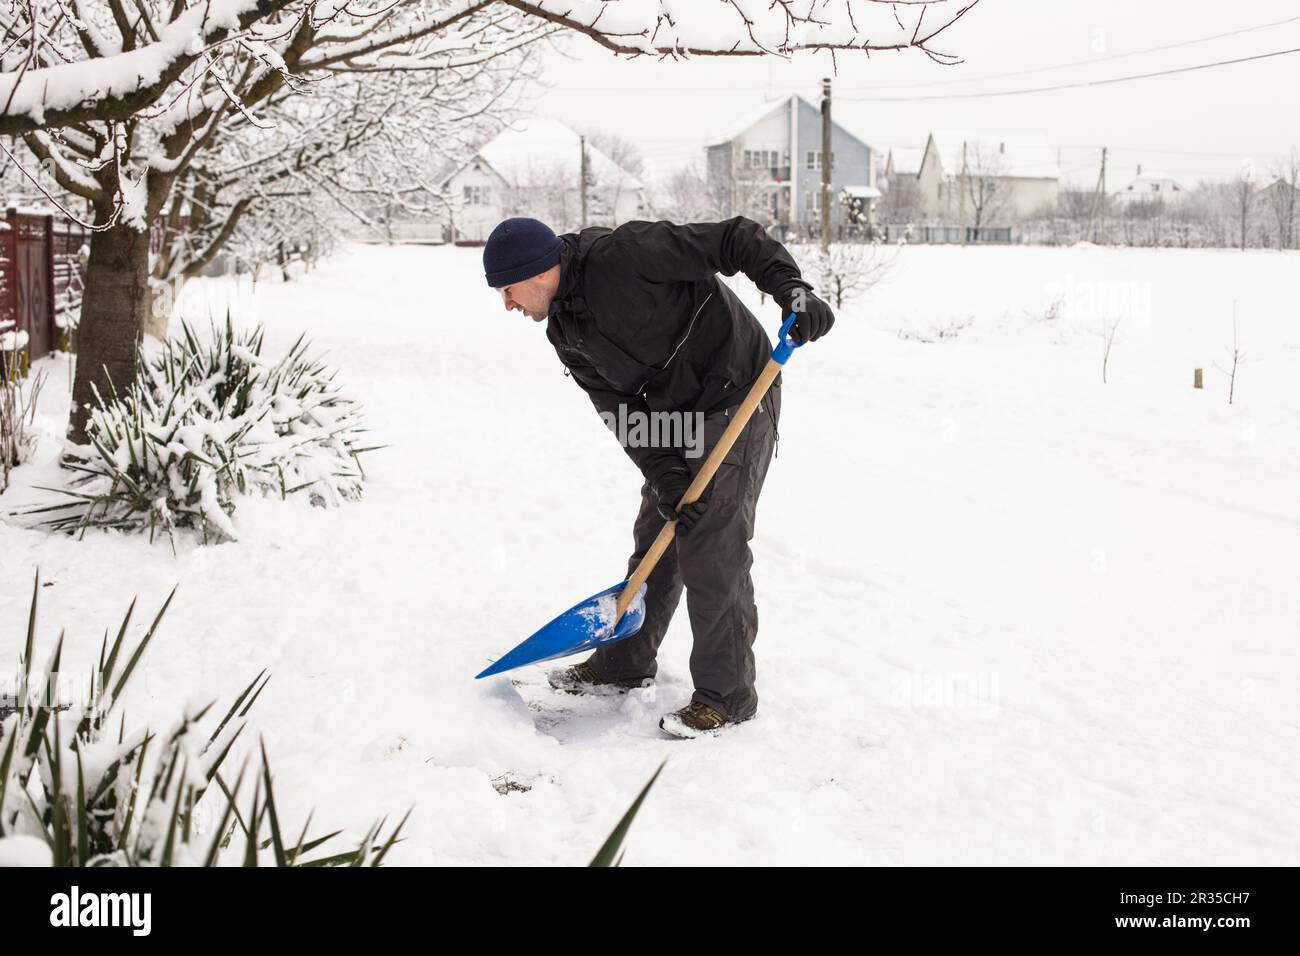 The Snow removal Stock Photo